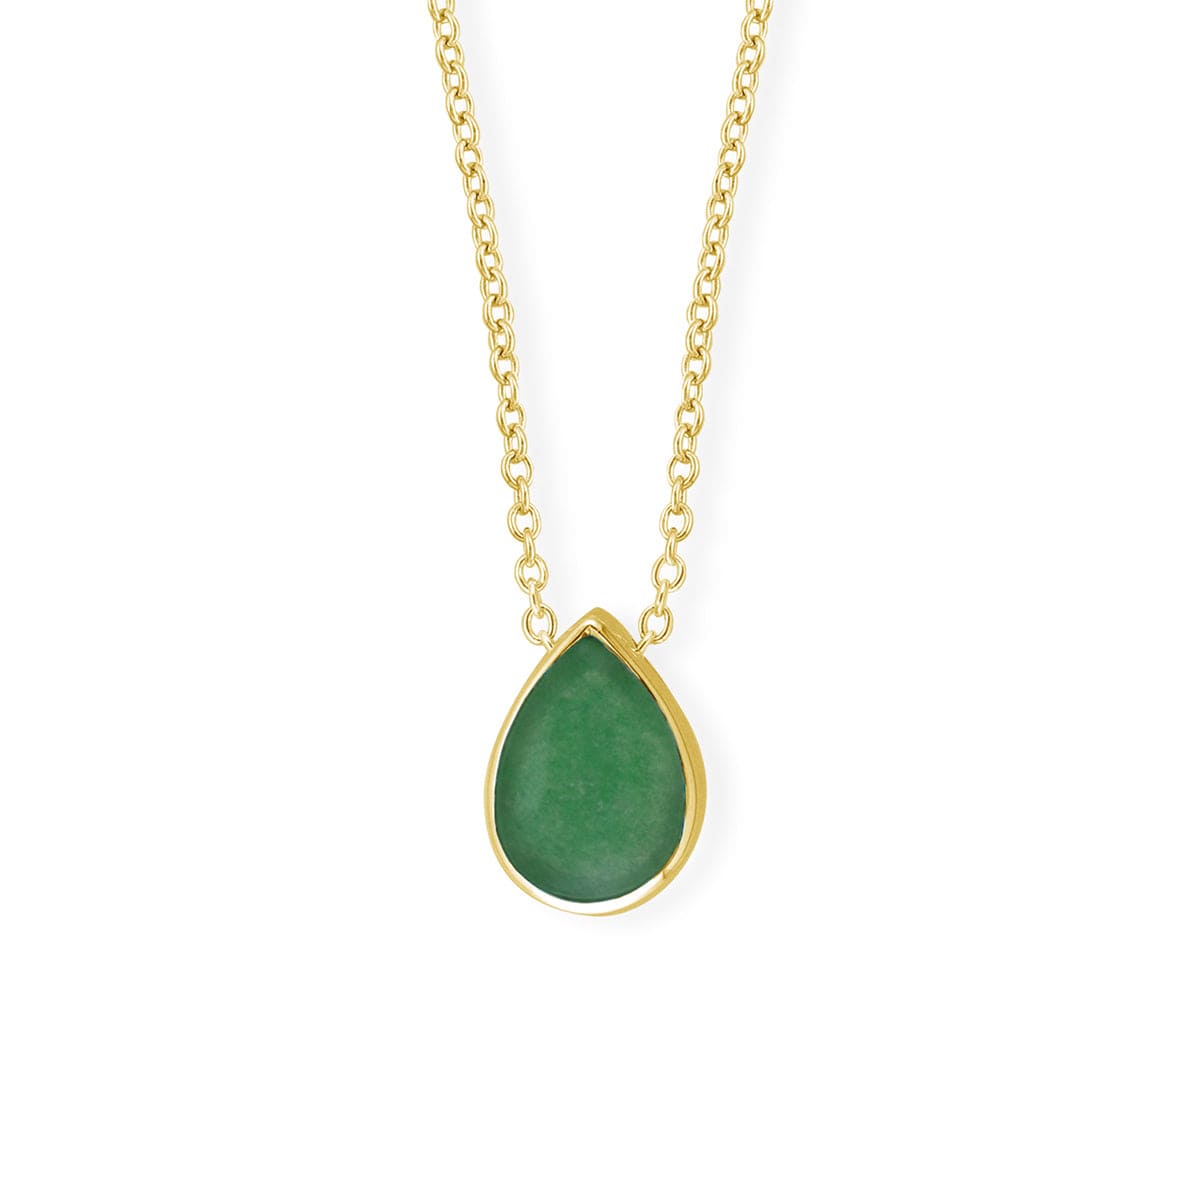 Boma Jewelry Necklaces Green Jade / 14K Gold Plated Treasured Teardrop Pendant Necklace